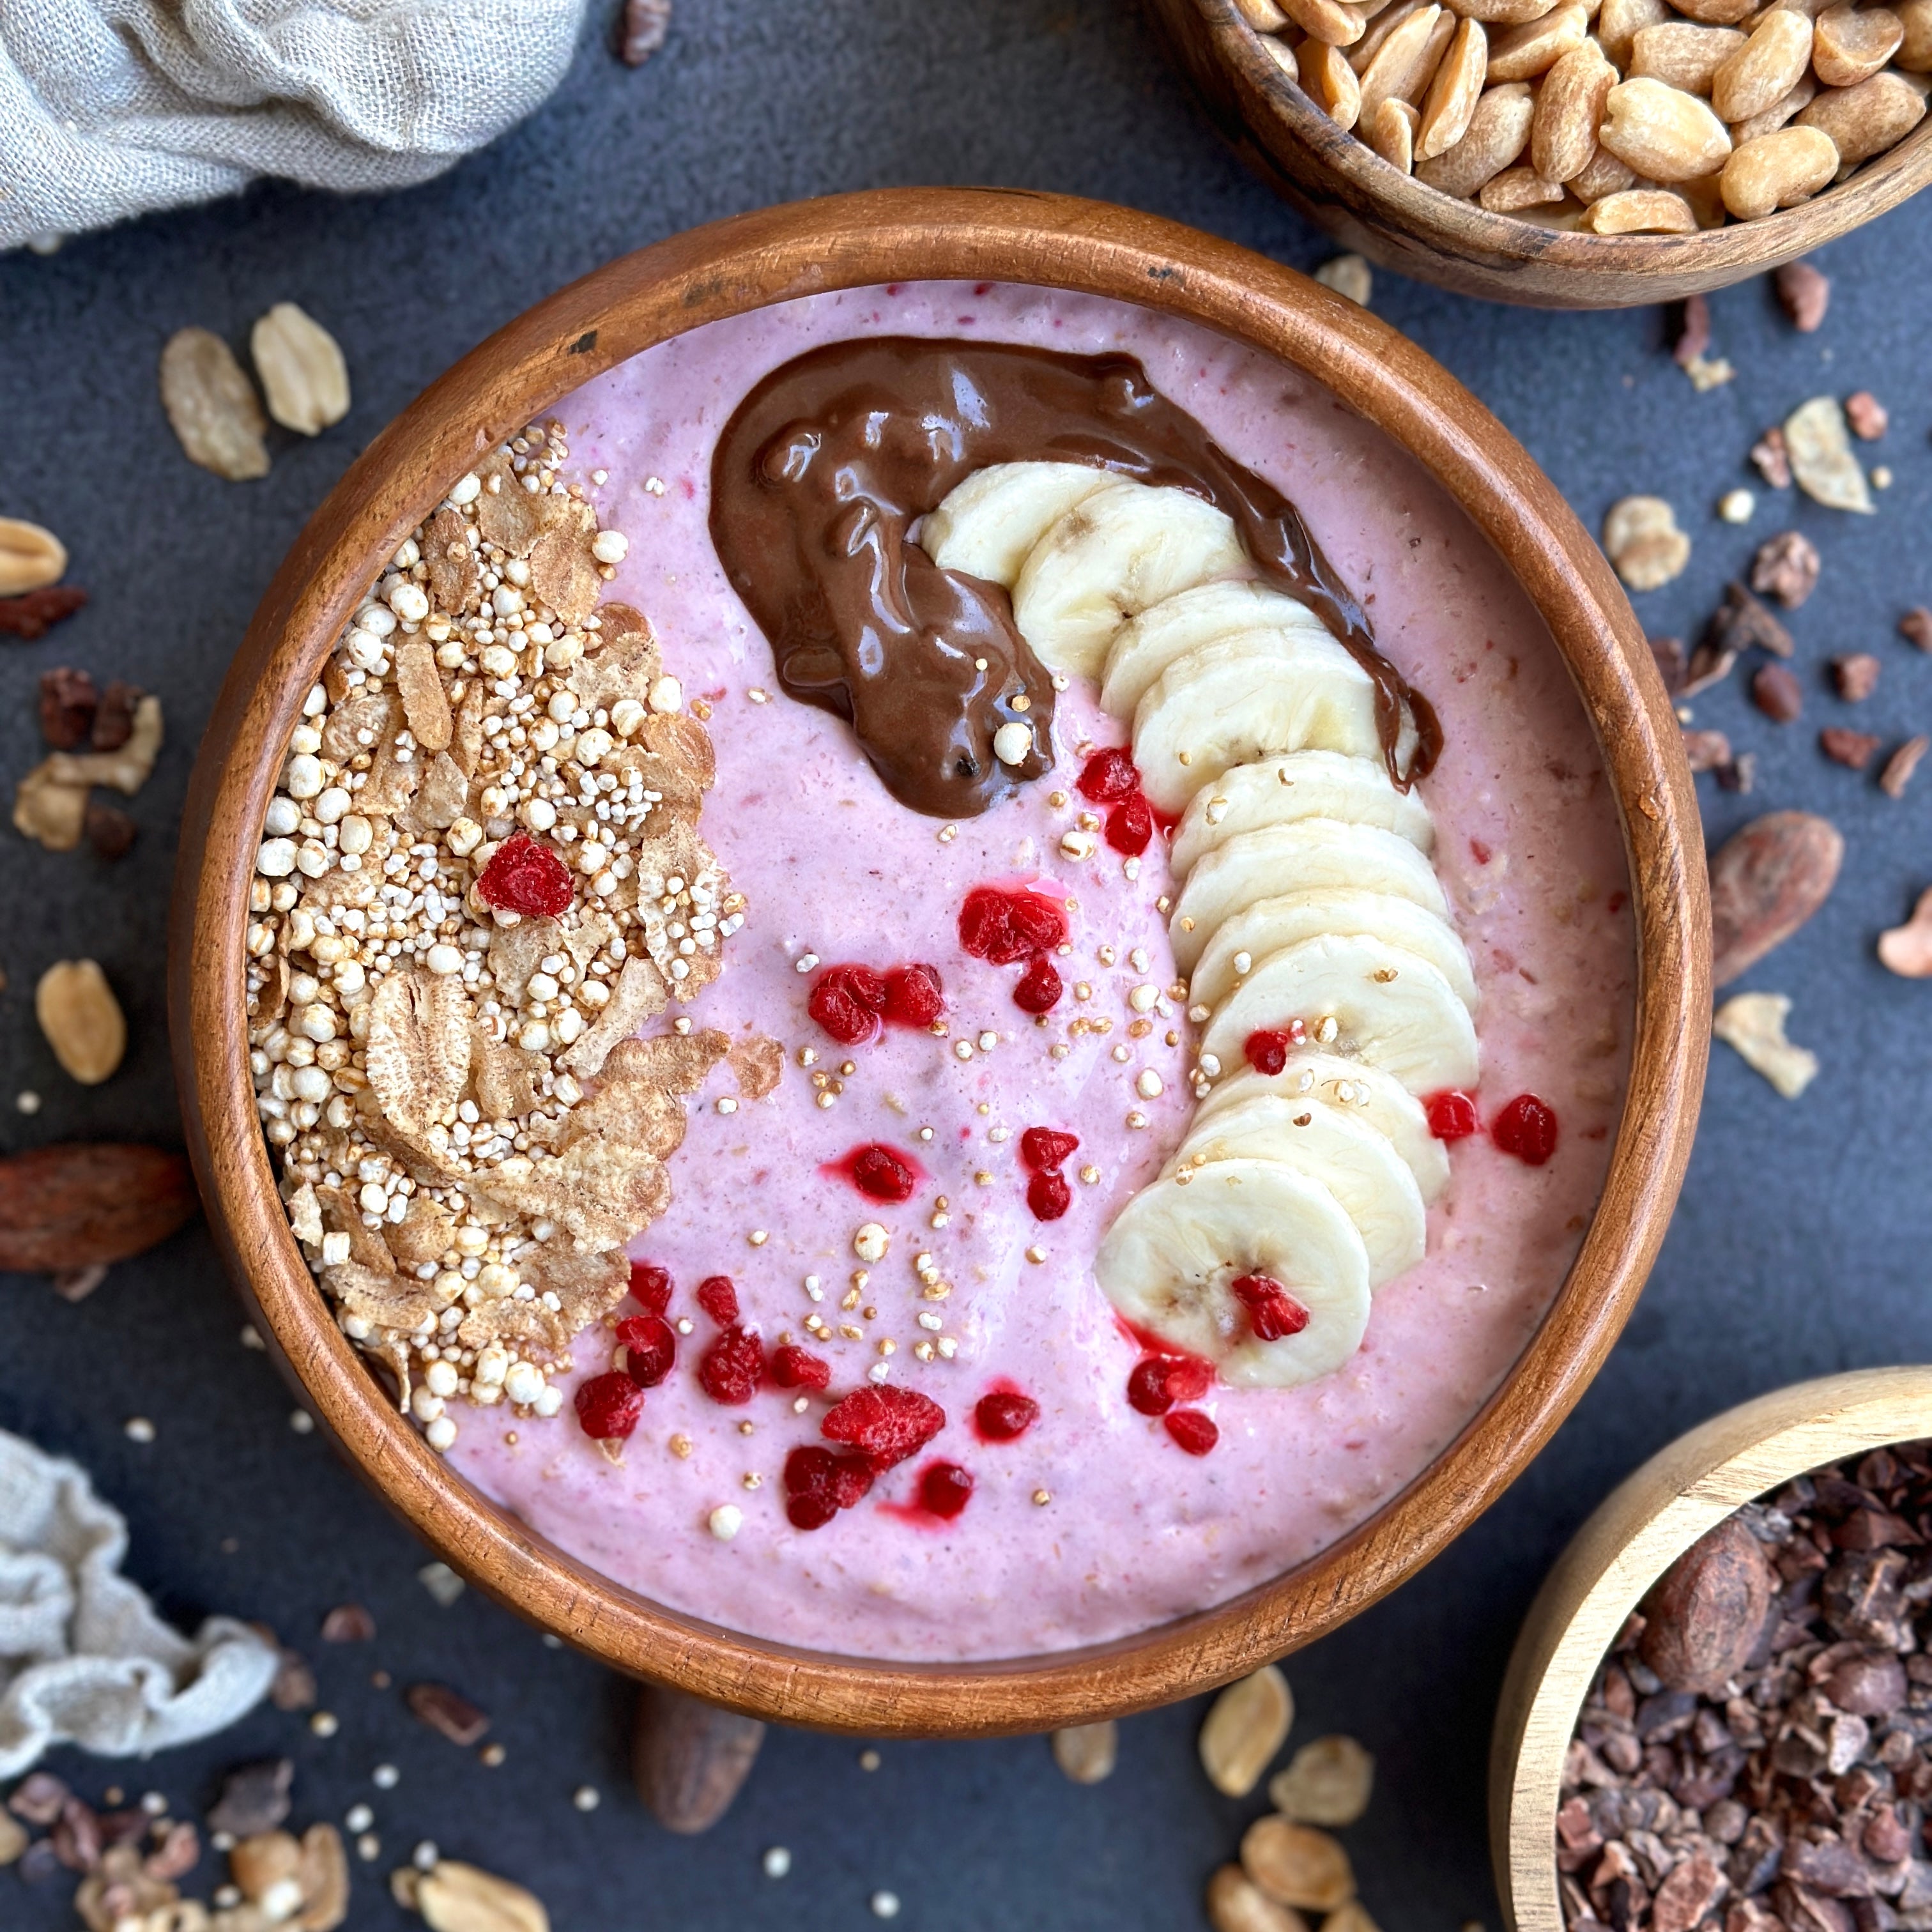 high protein himbeer-smoothiebowl